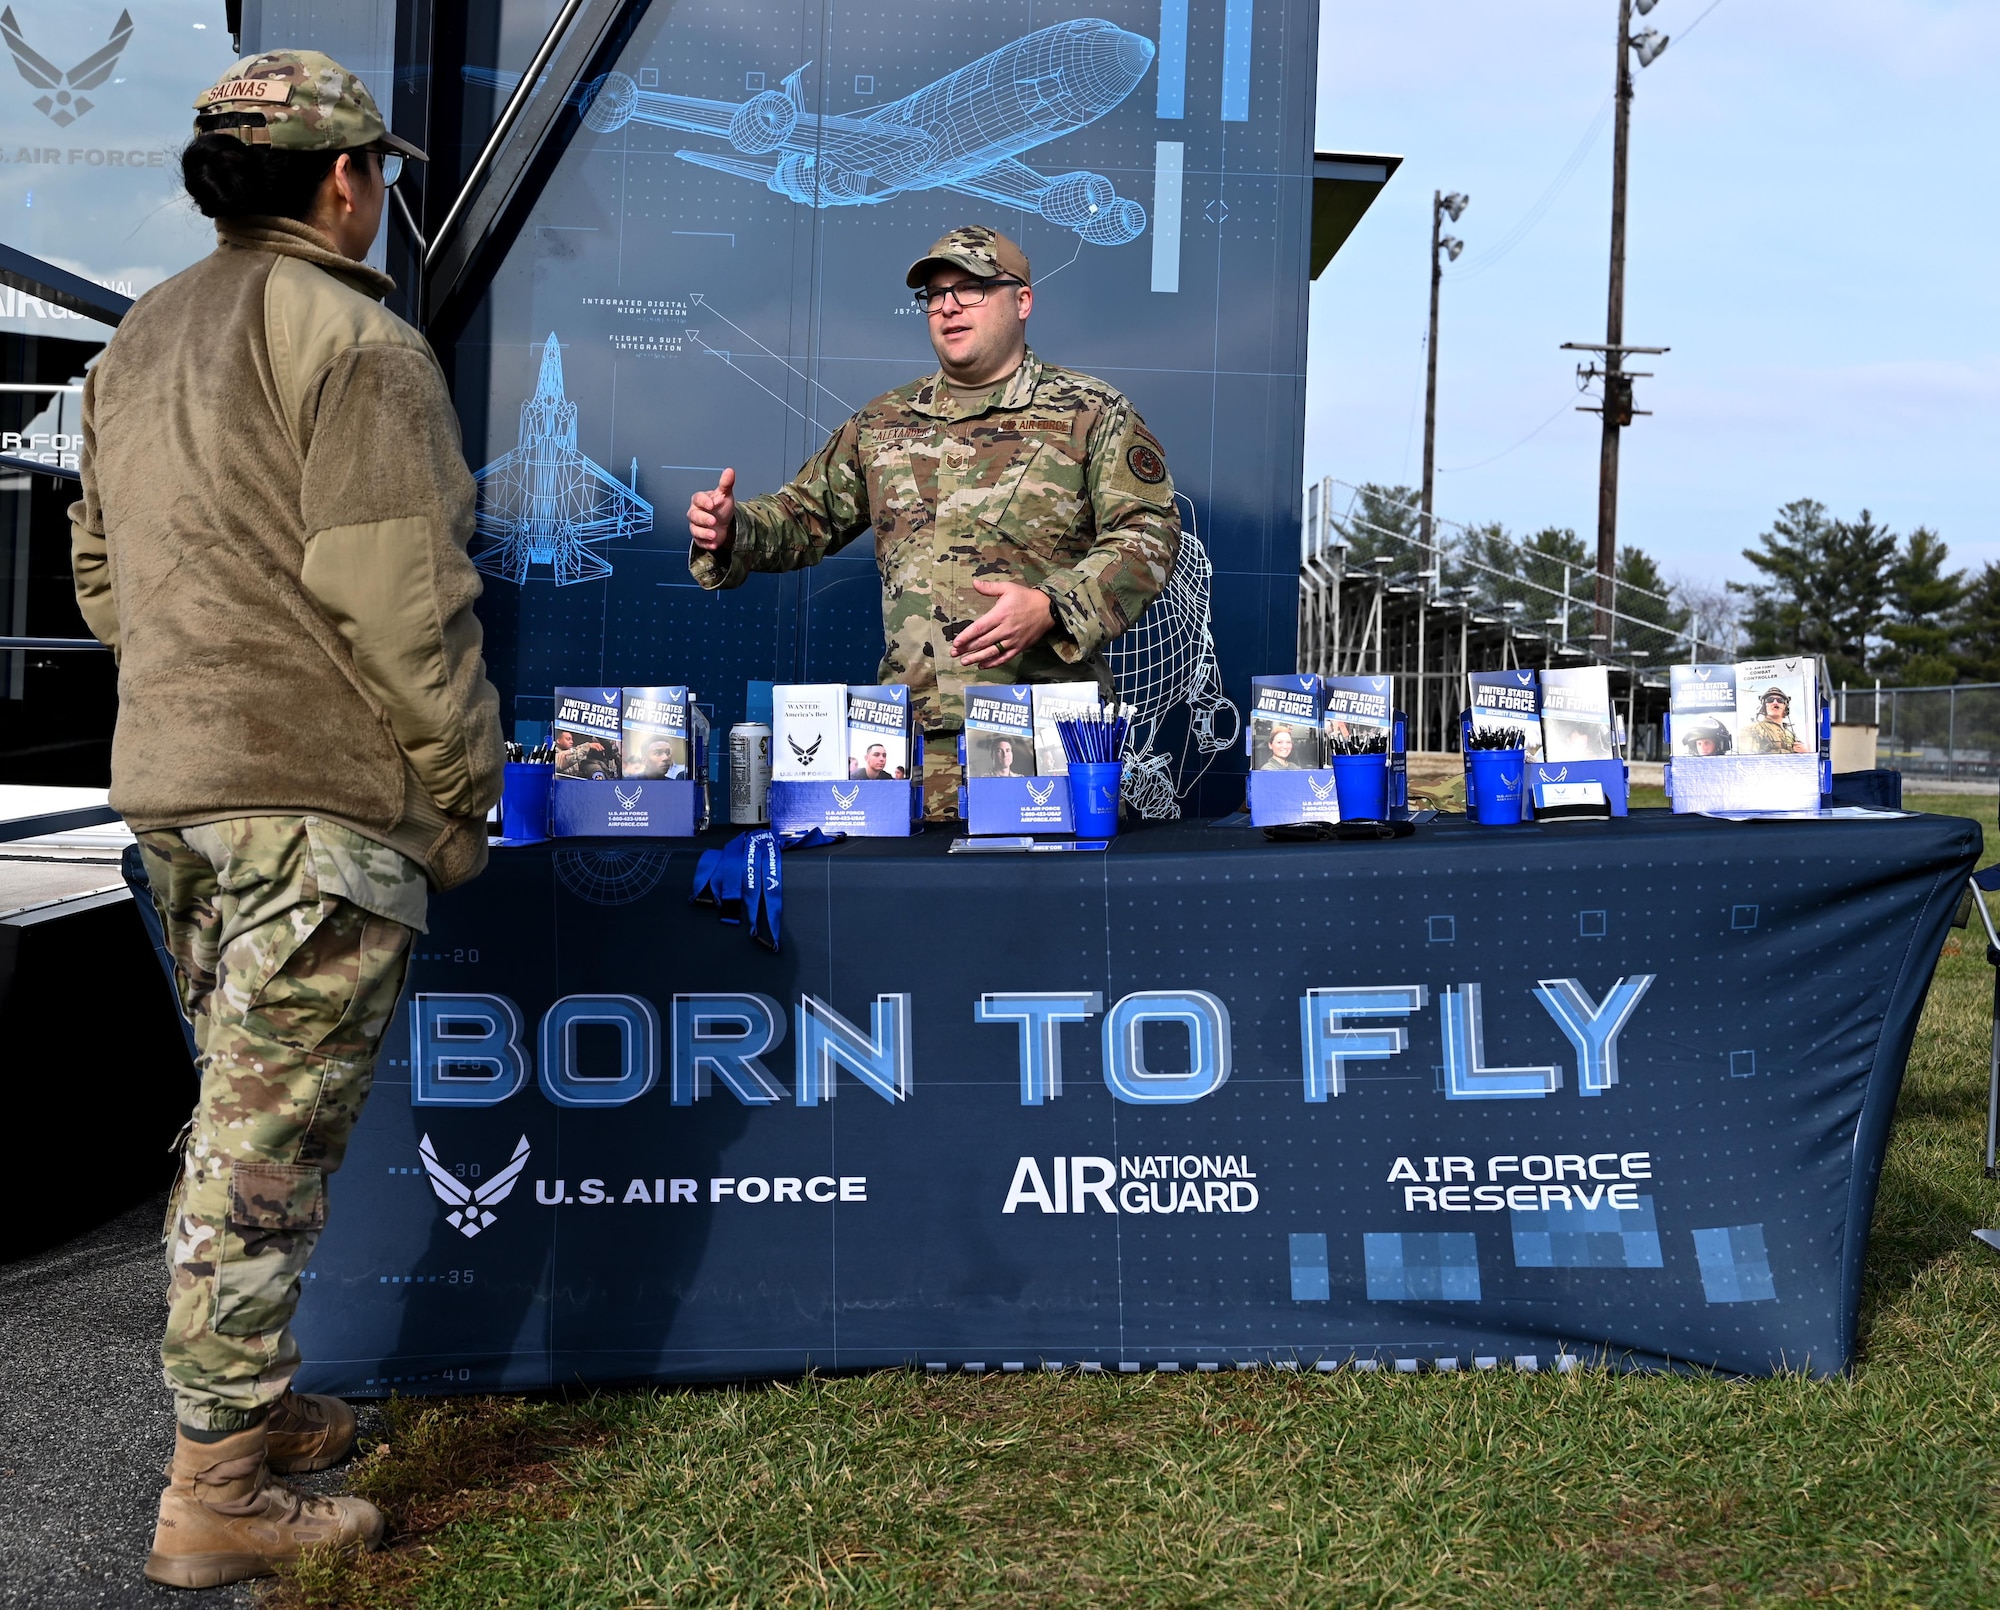 Air Force recruiters talk at a recruiting booth